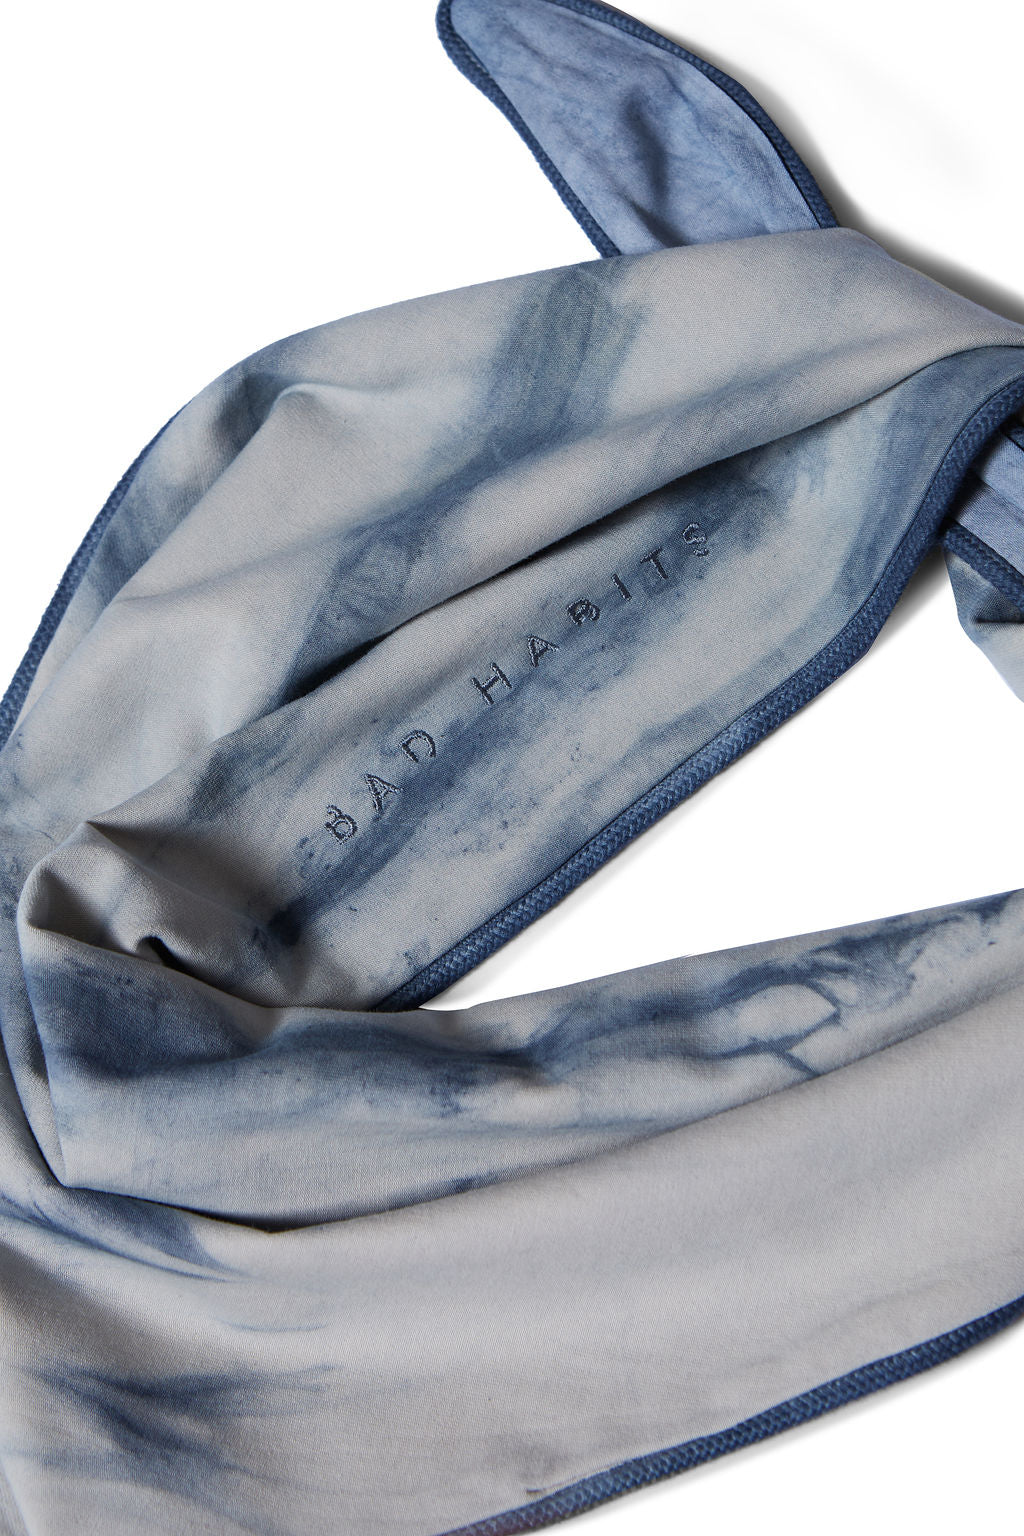 Waves / Blue Tides Dyed Bandana Neck Scarf and Head Scarf